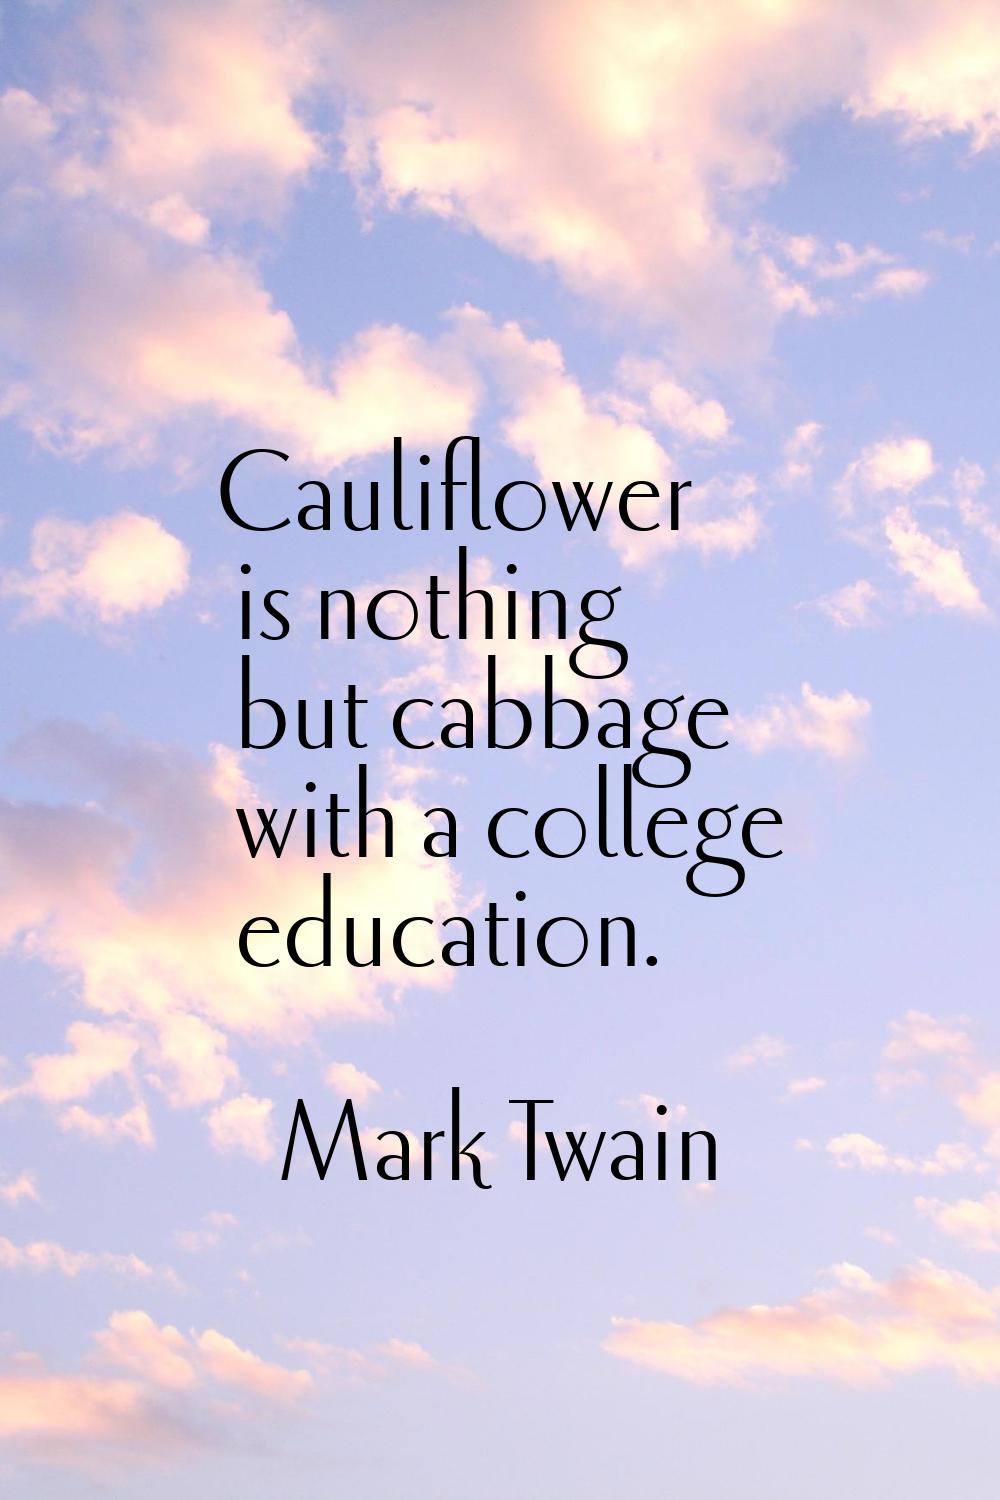 Cauliflower is nothing but cabbage with a college education.